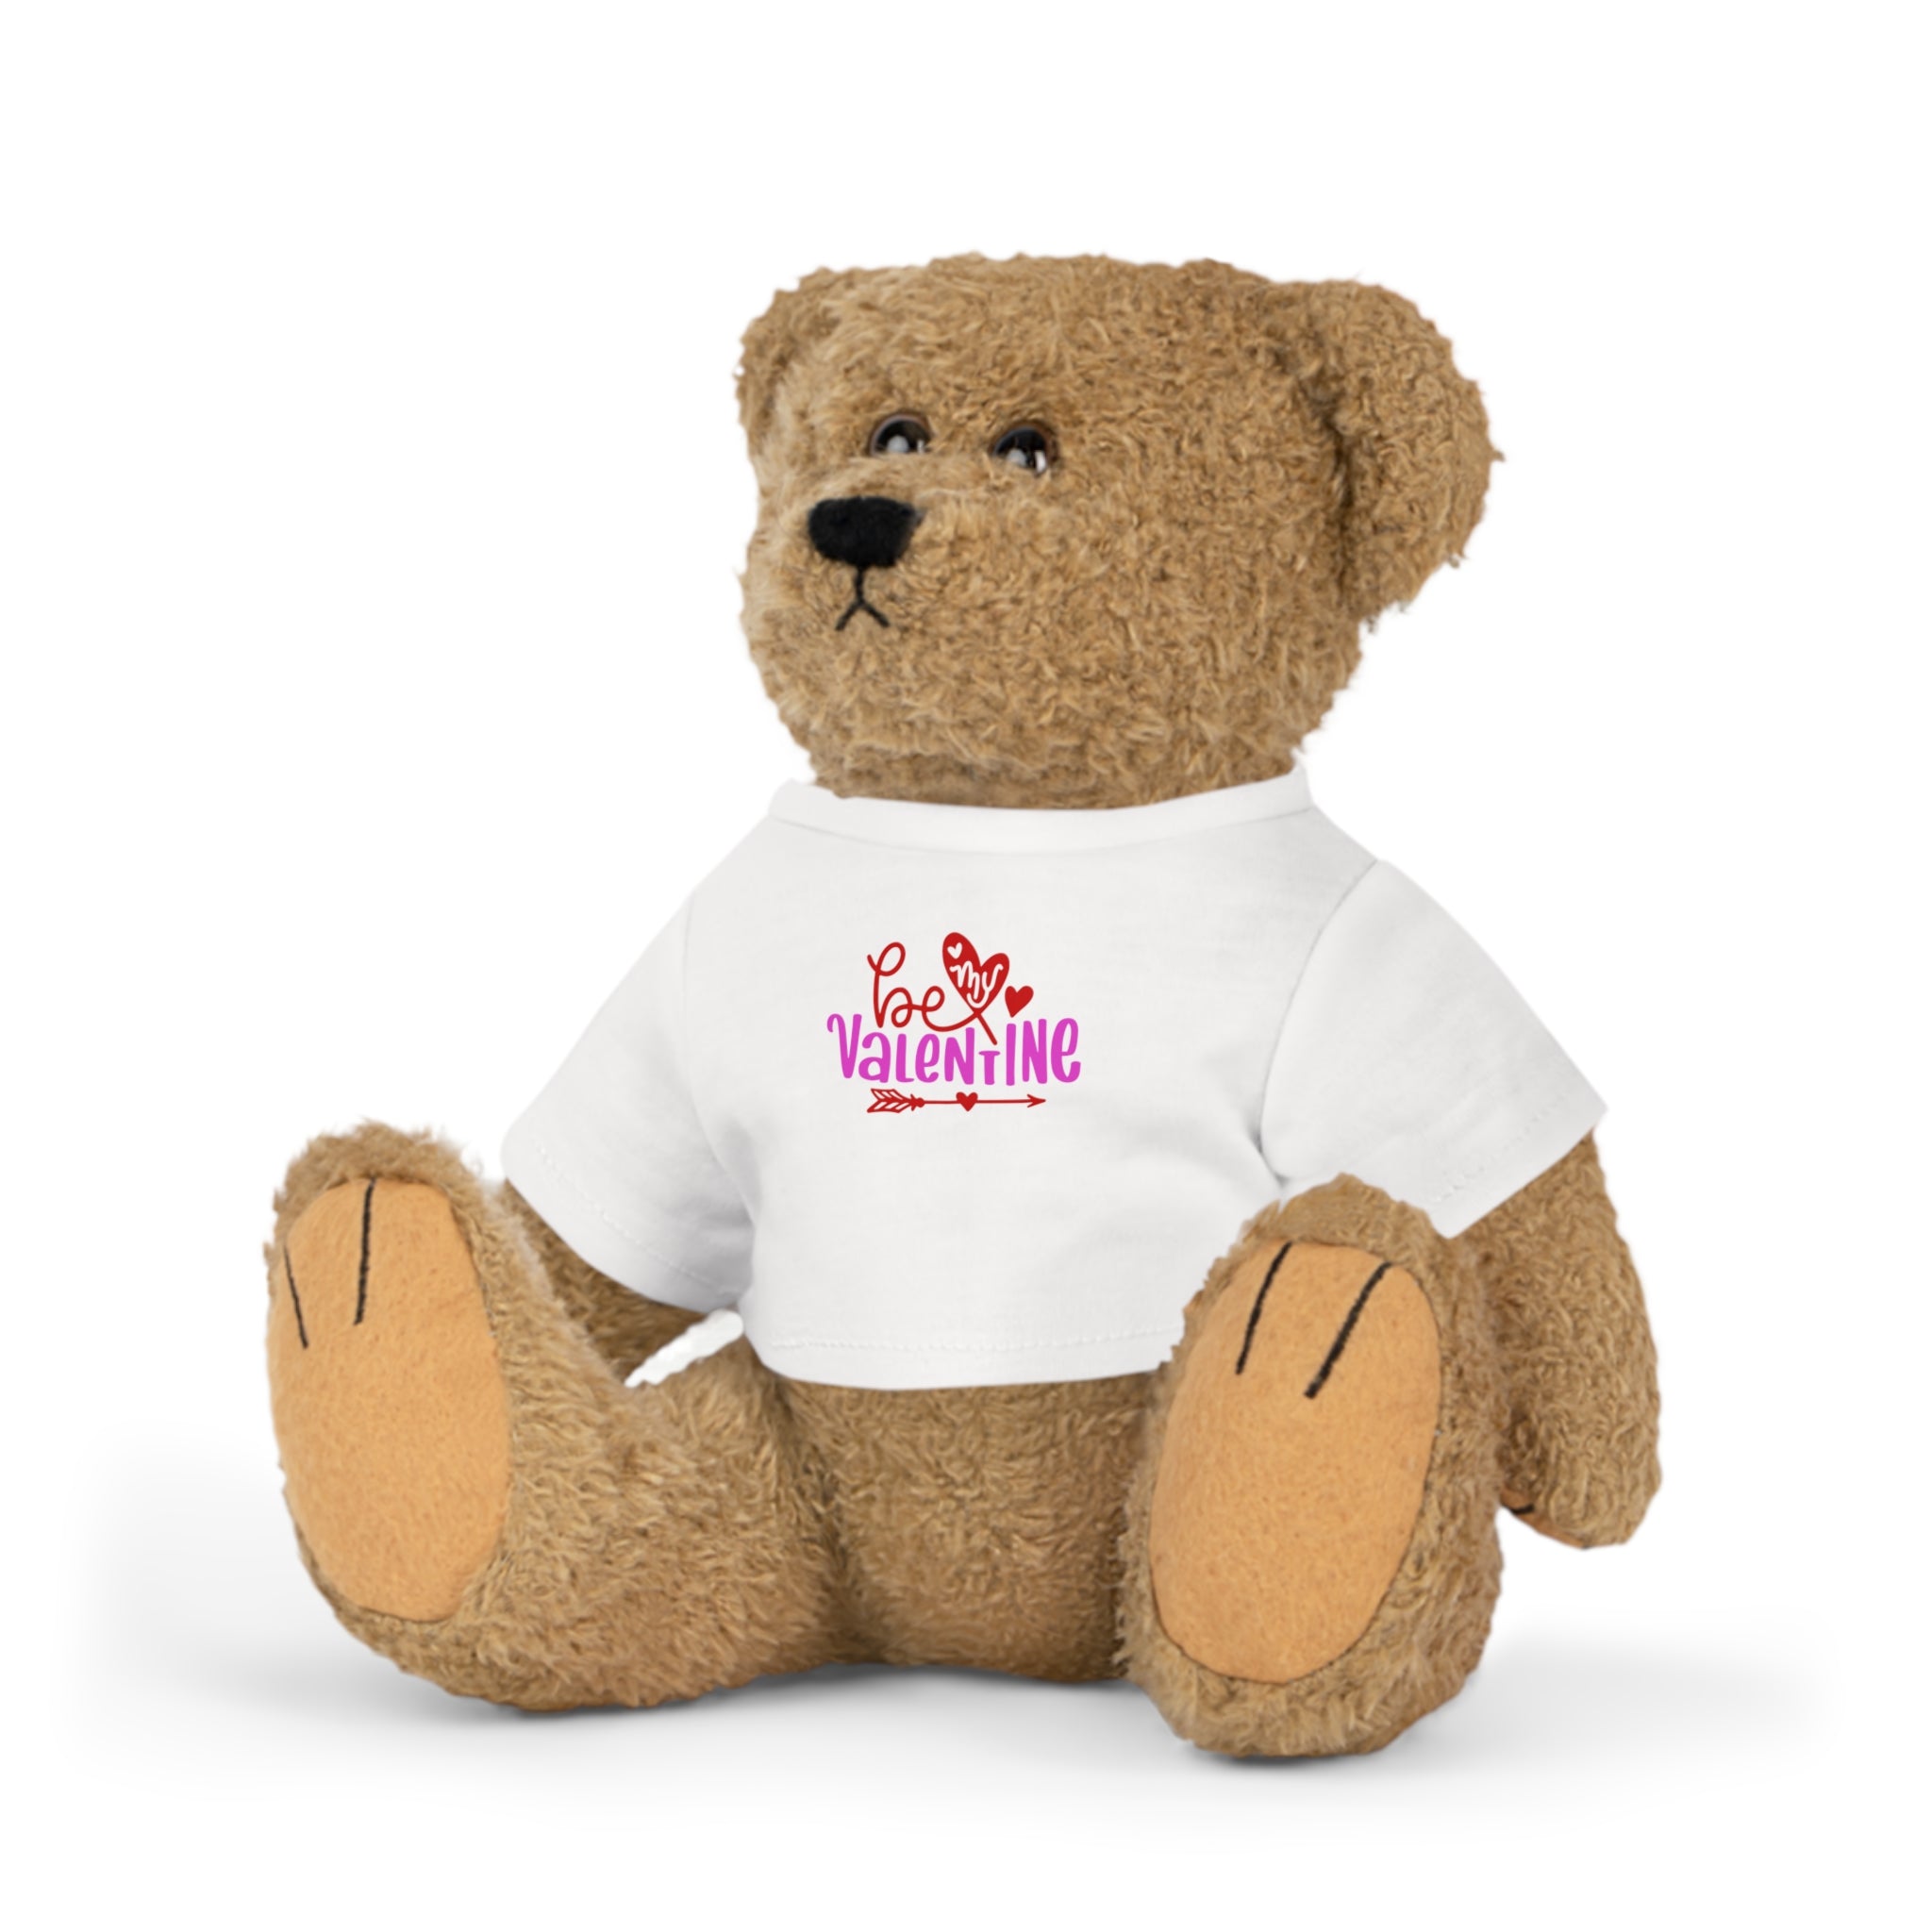 Valentine Plush Toy with T-Shirt